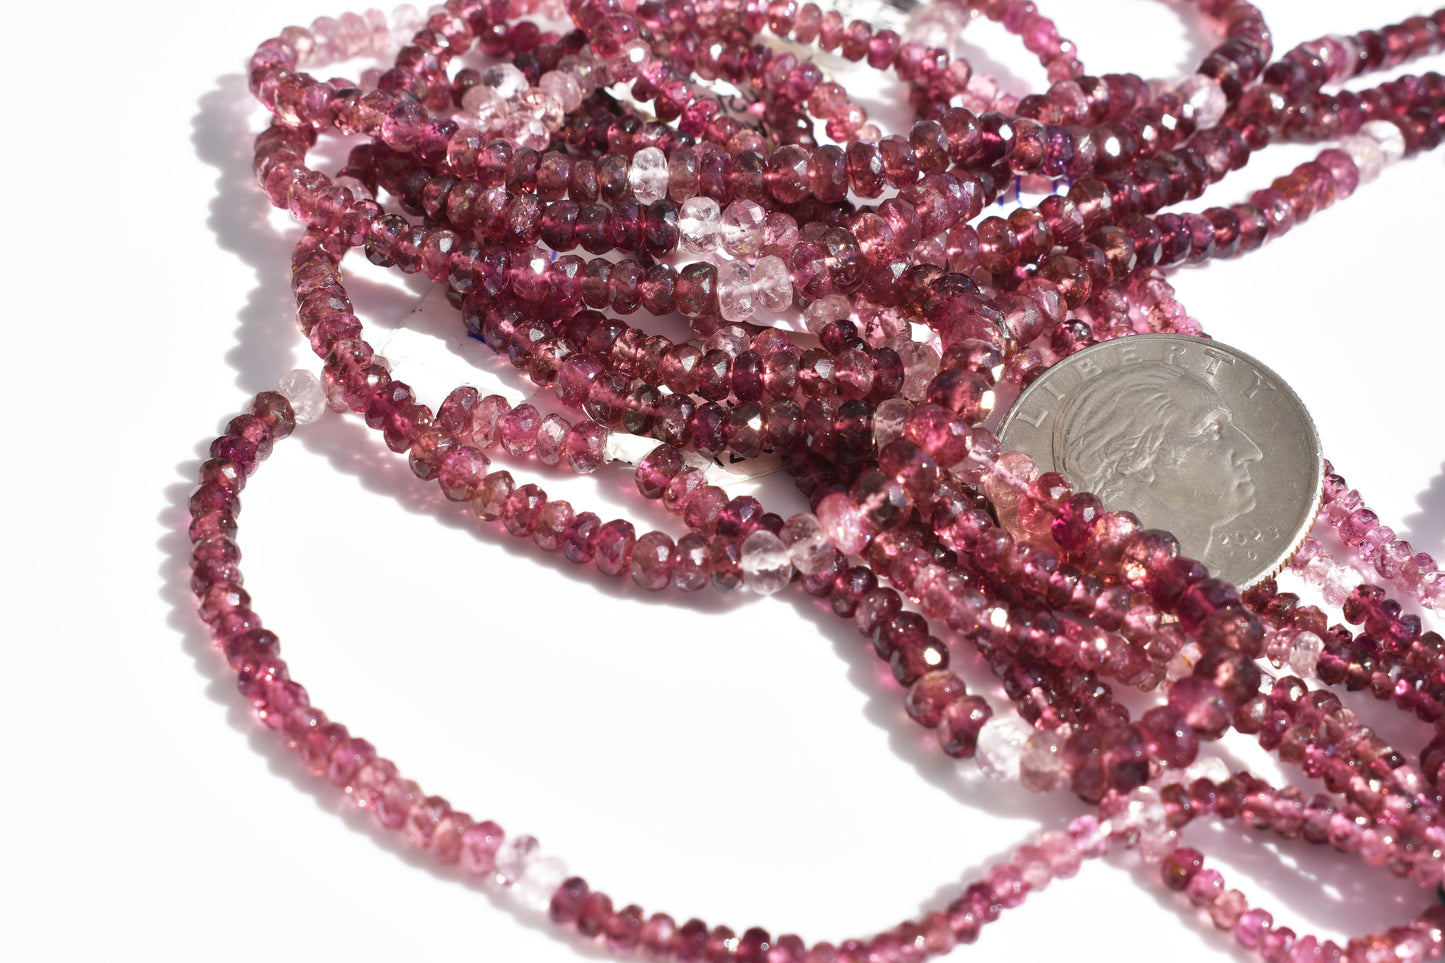 Ombre Pink Tourmaline Rondelle Graduated Beads - 2.5-3mm